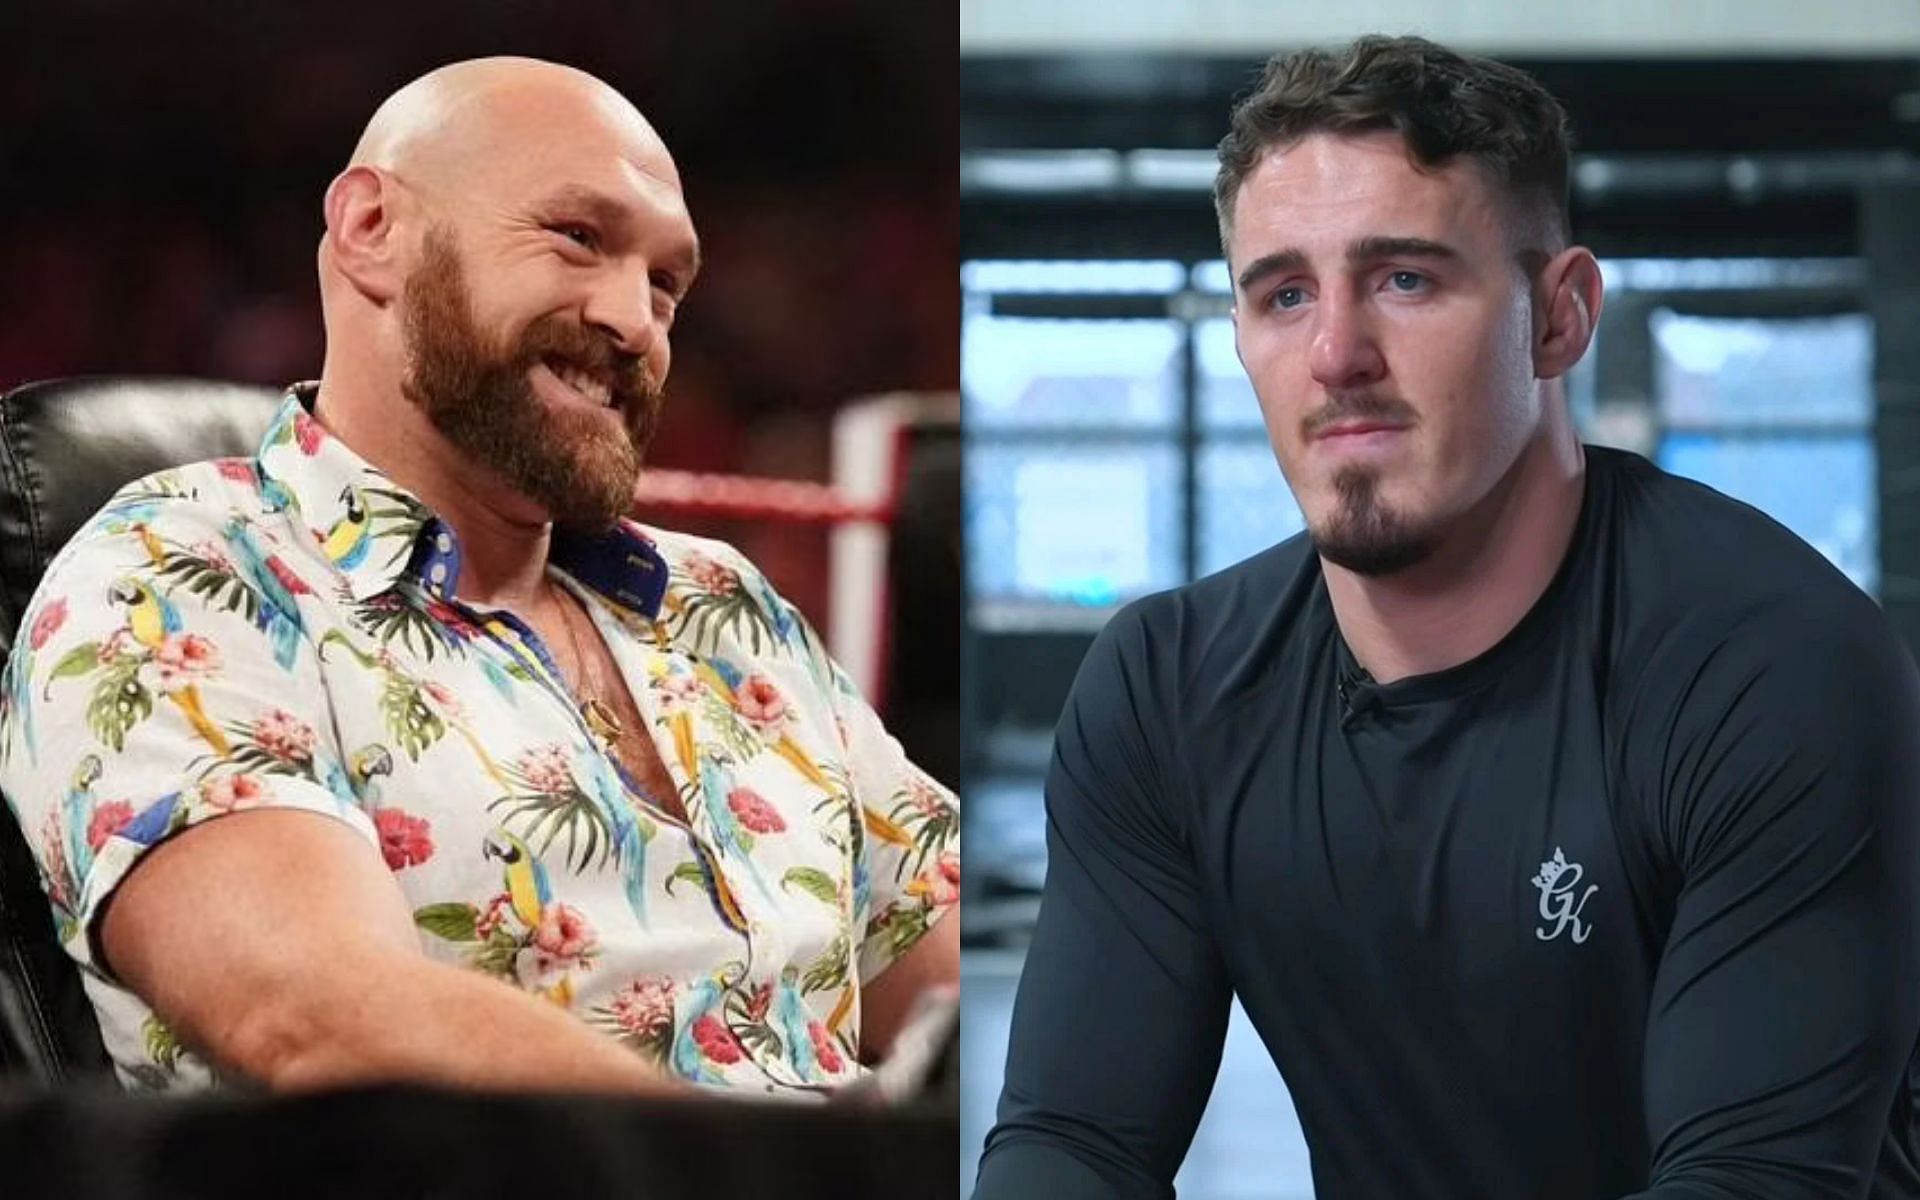 Tyson Fury (left) and Tom Aspinall (right)